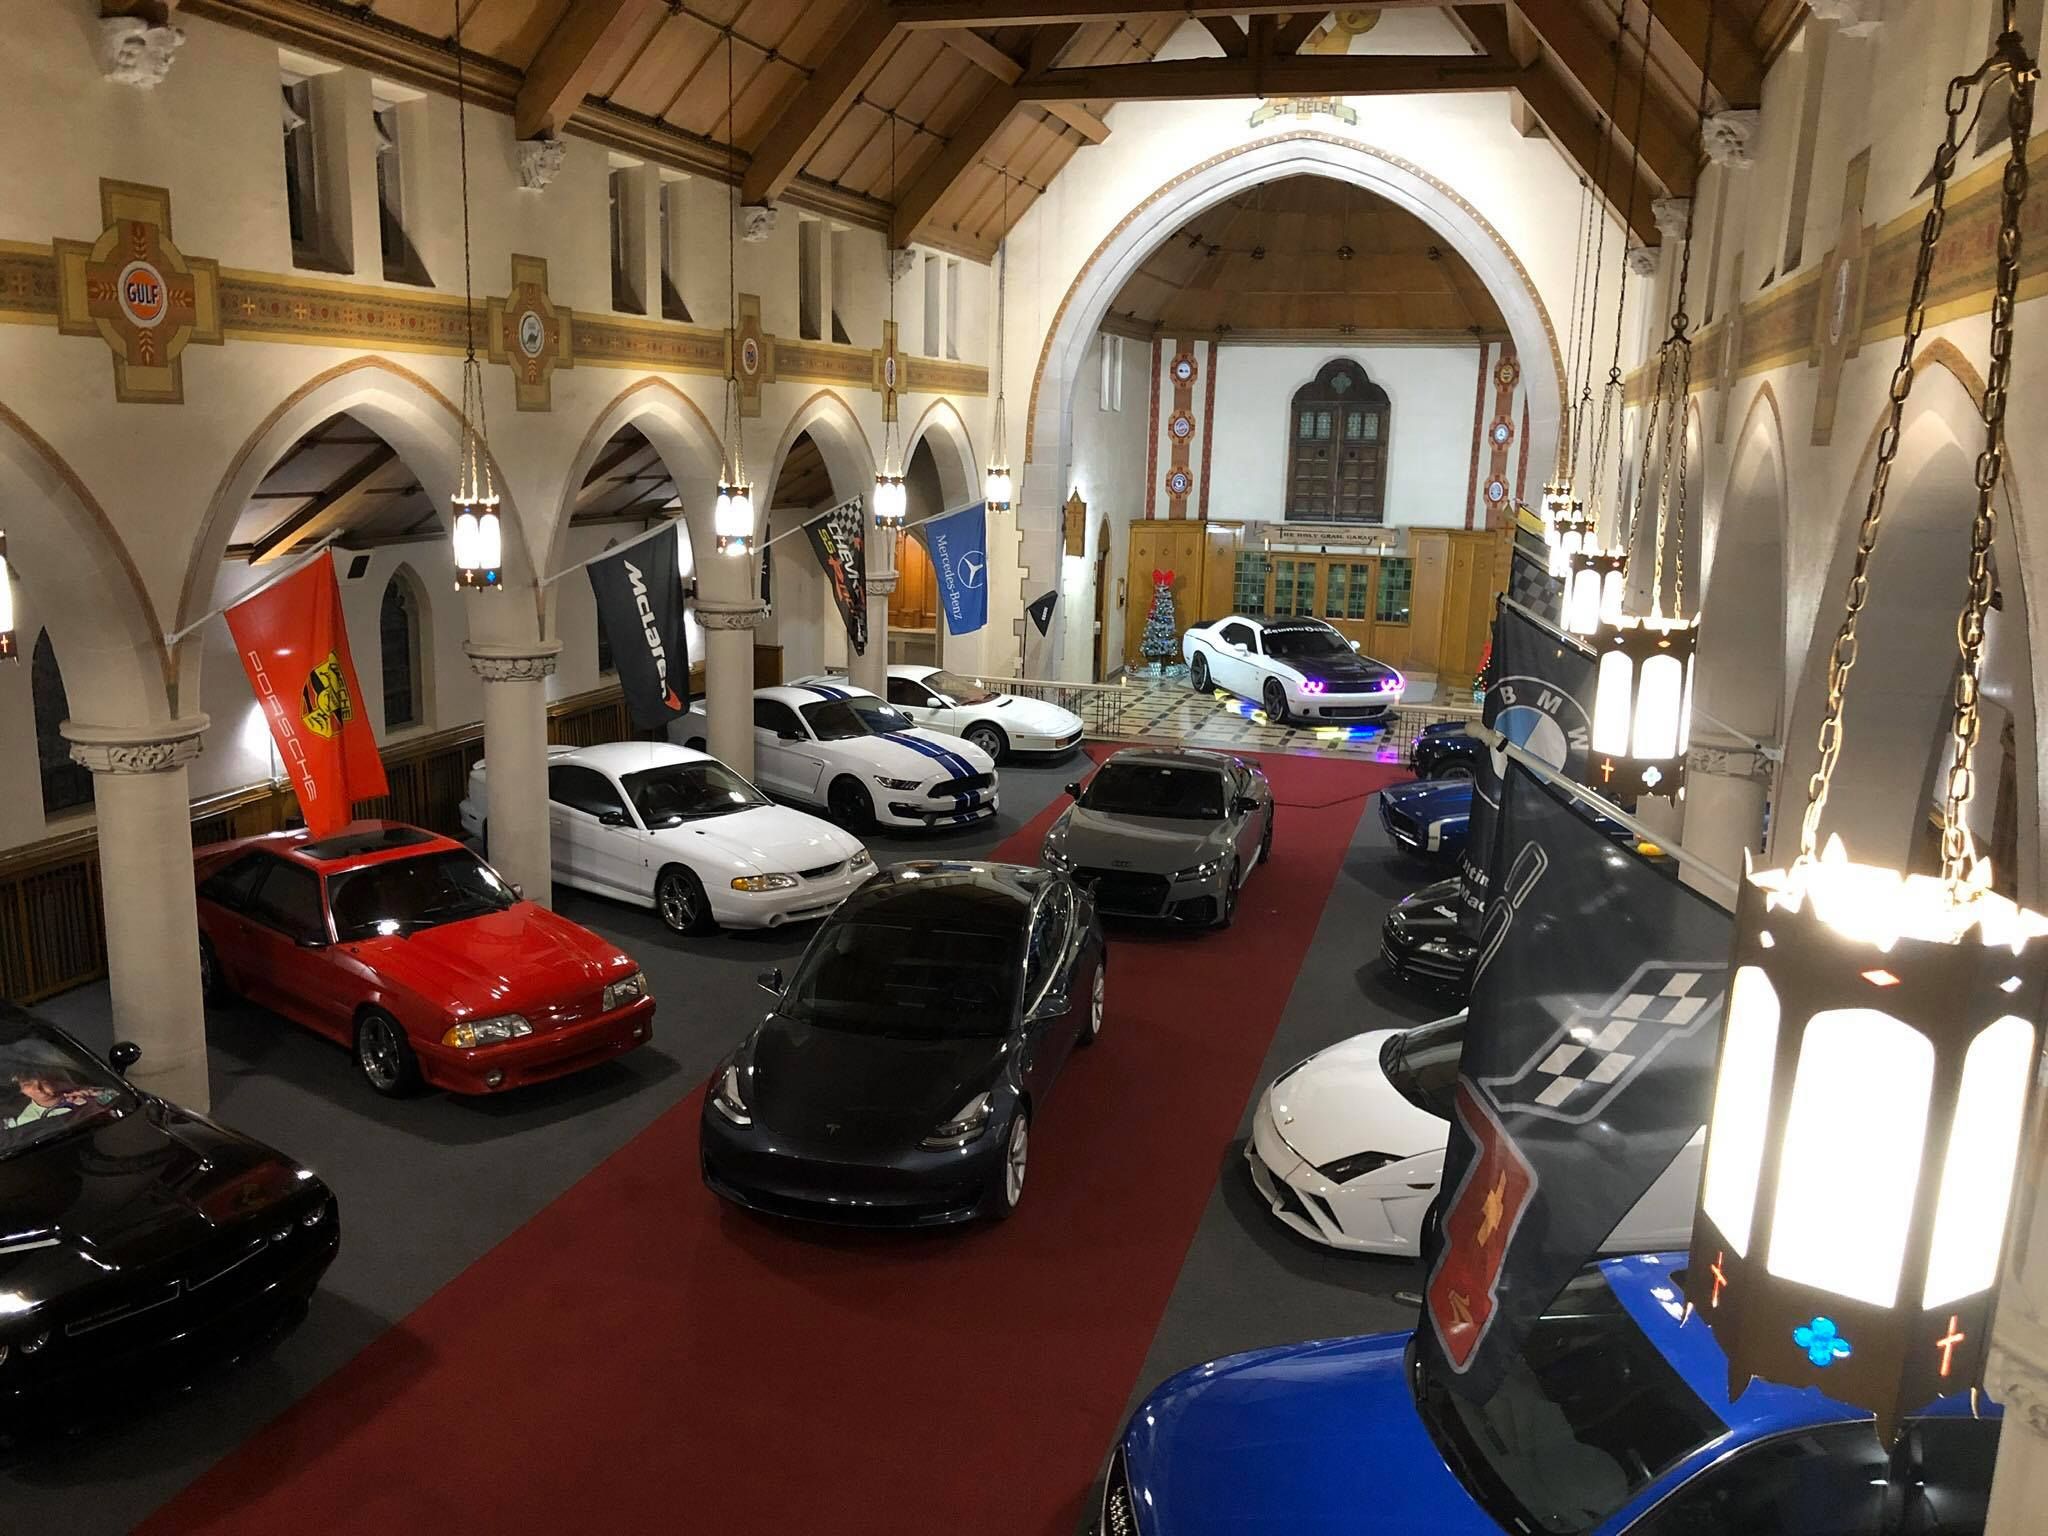 The Holy Grail Garage Is Literally Automotive Heaven on Earth In a Church